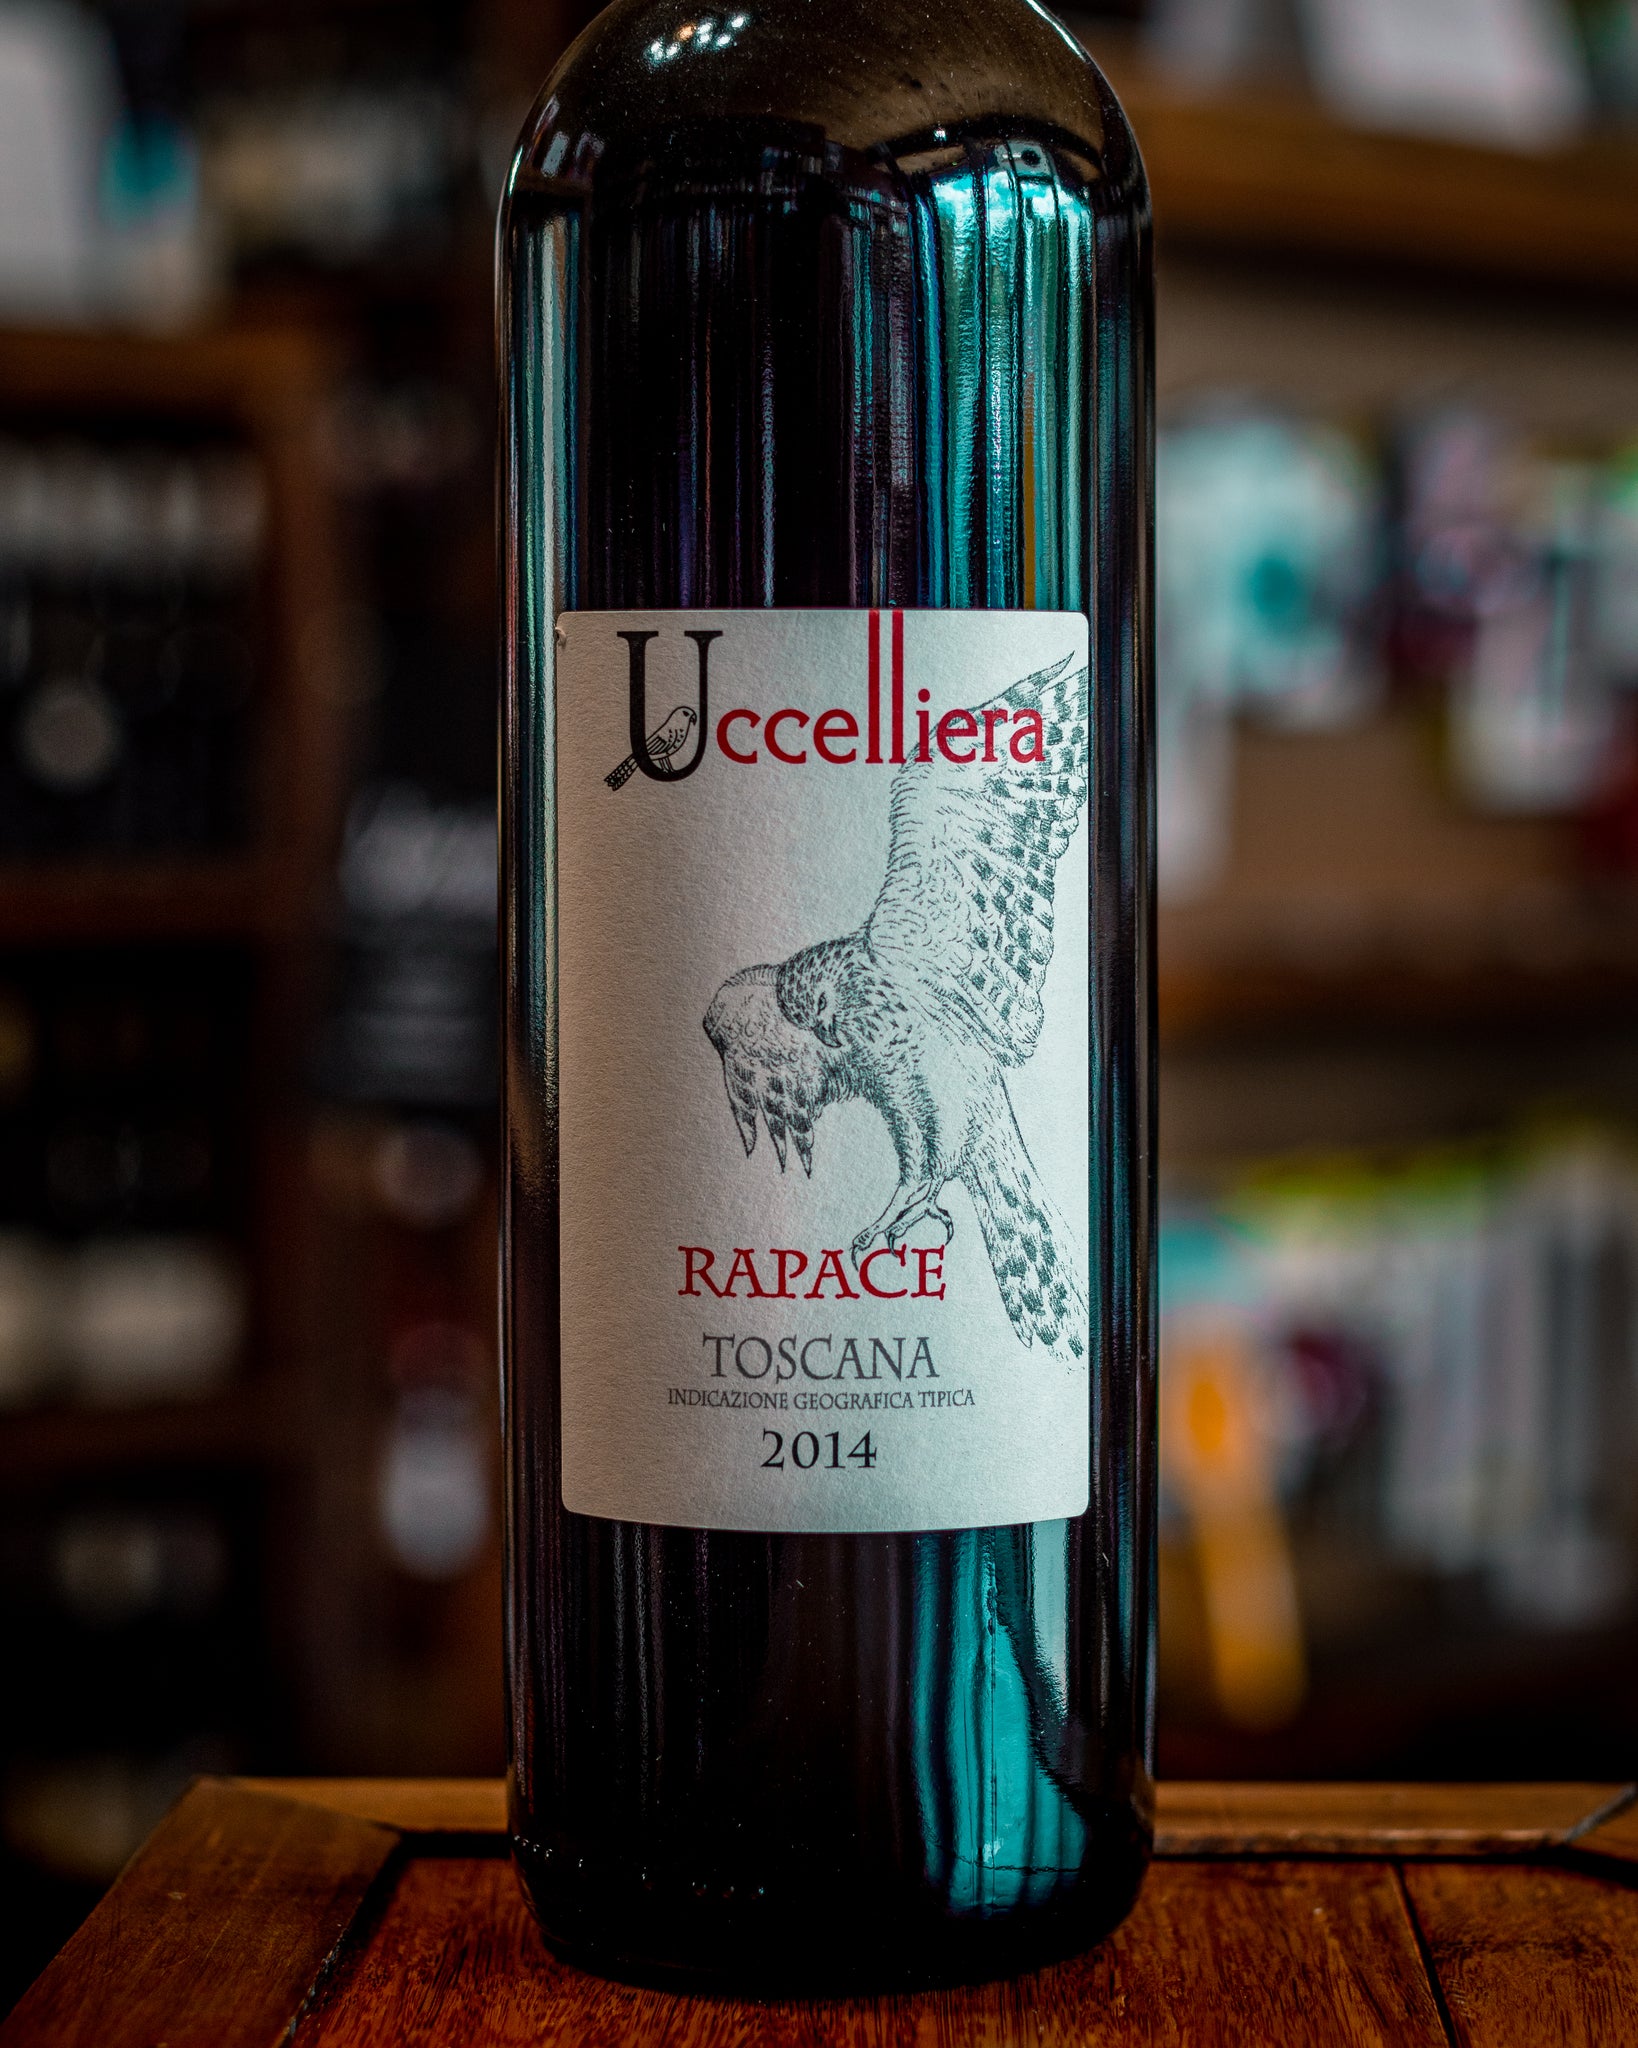 Super Tuscan, Uccelliera Rapace